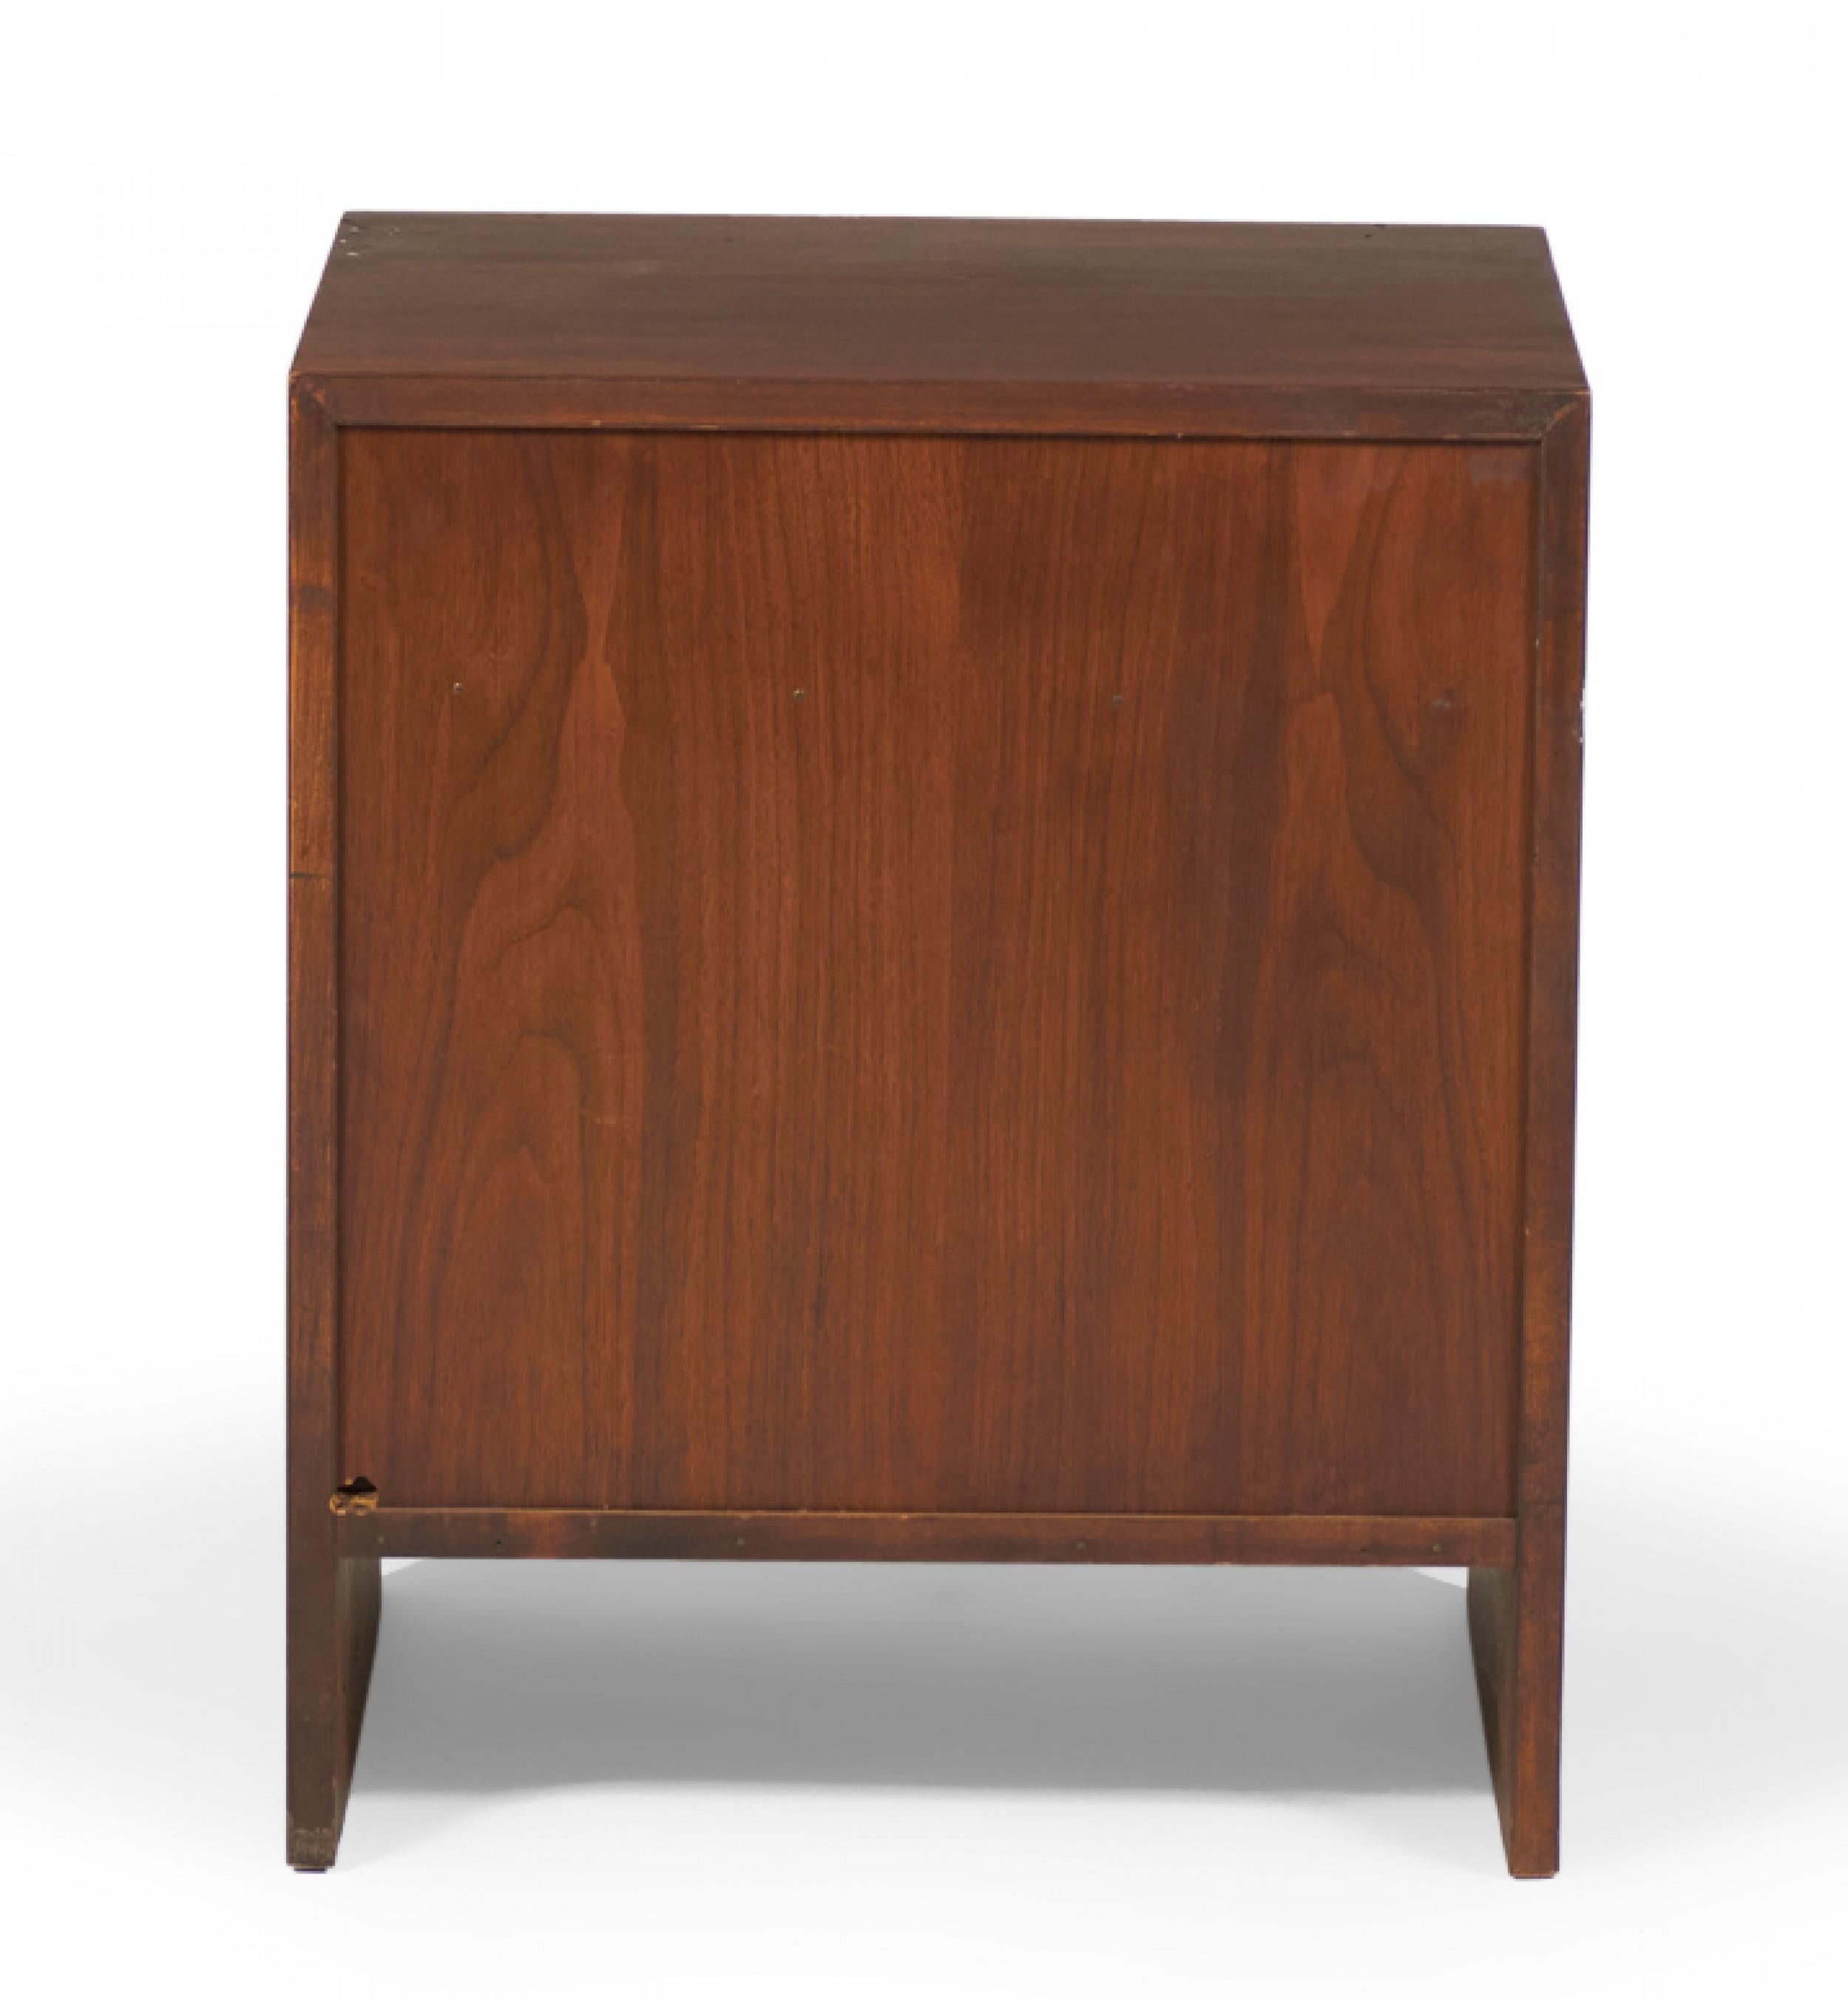 T.H. Robsjohn-Gibbings for Widdicomb Walnut Single Drawer Nightstand In Good Condition For Sale In New York, NY